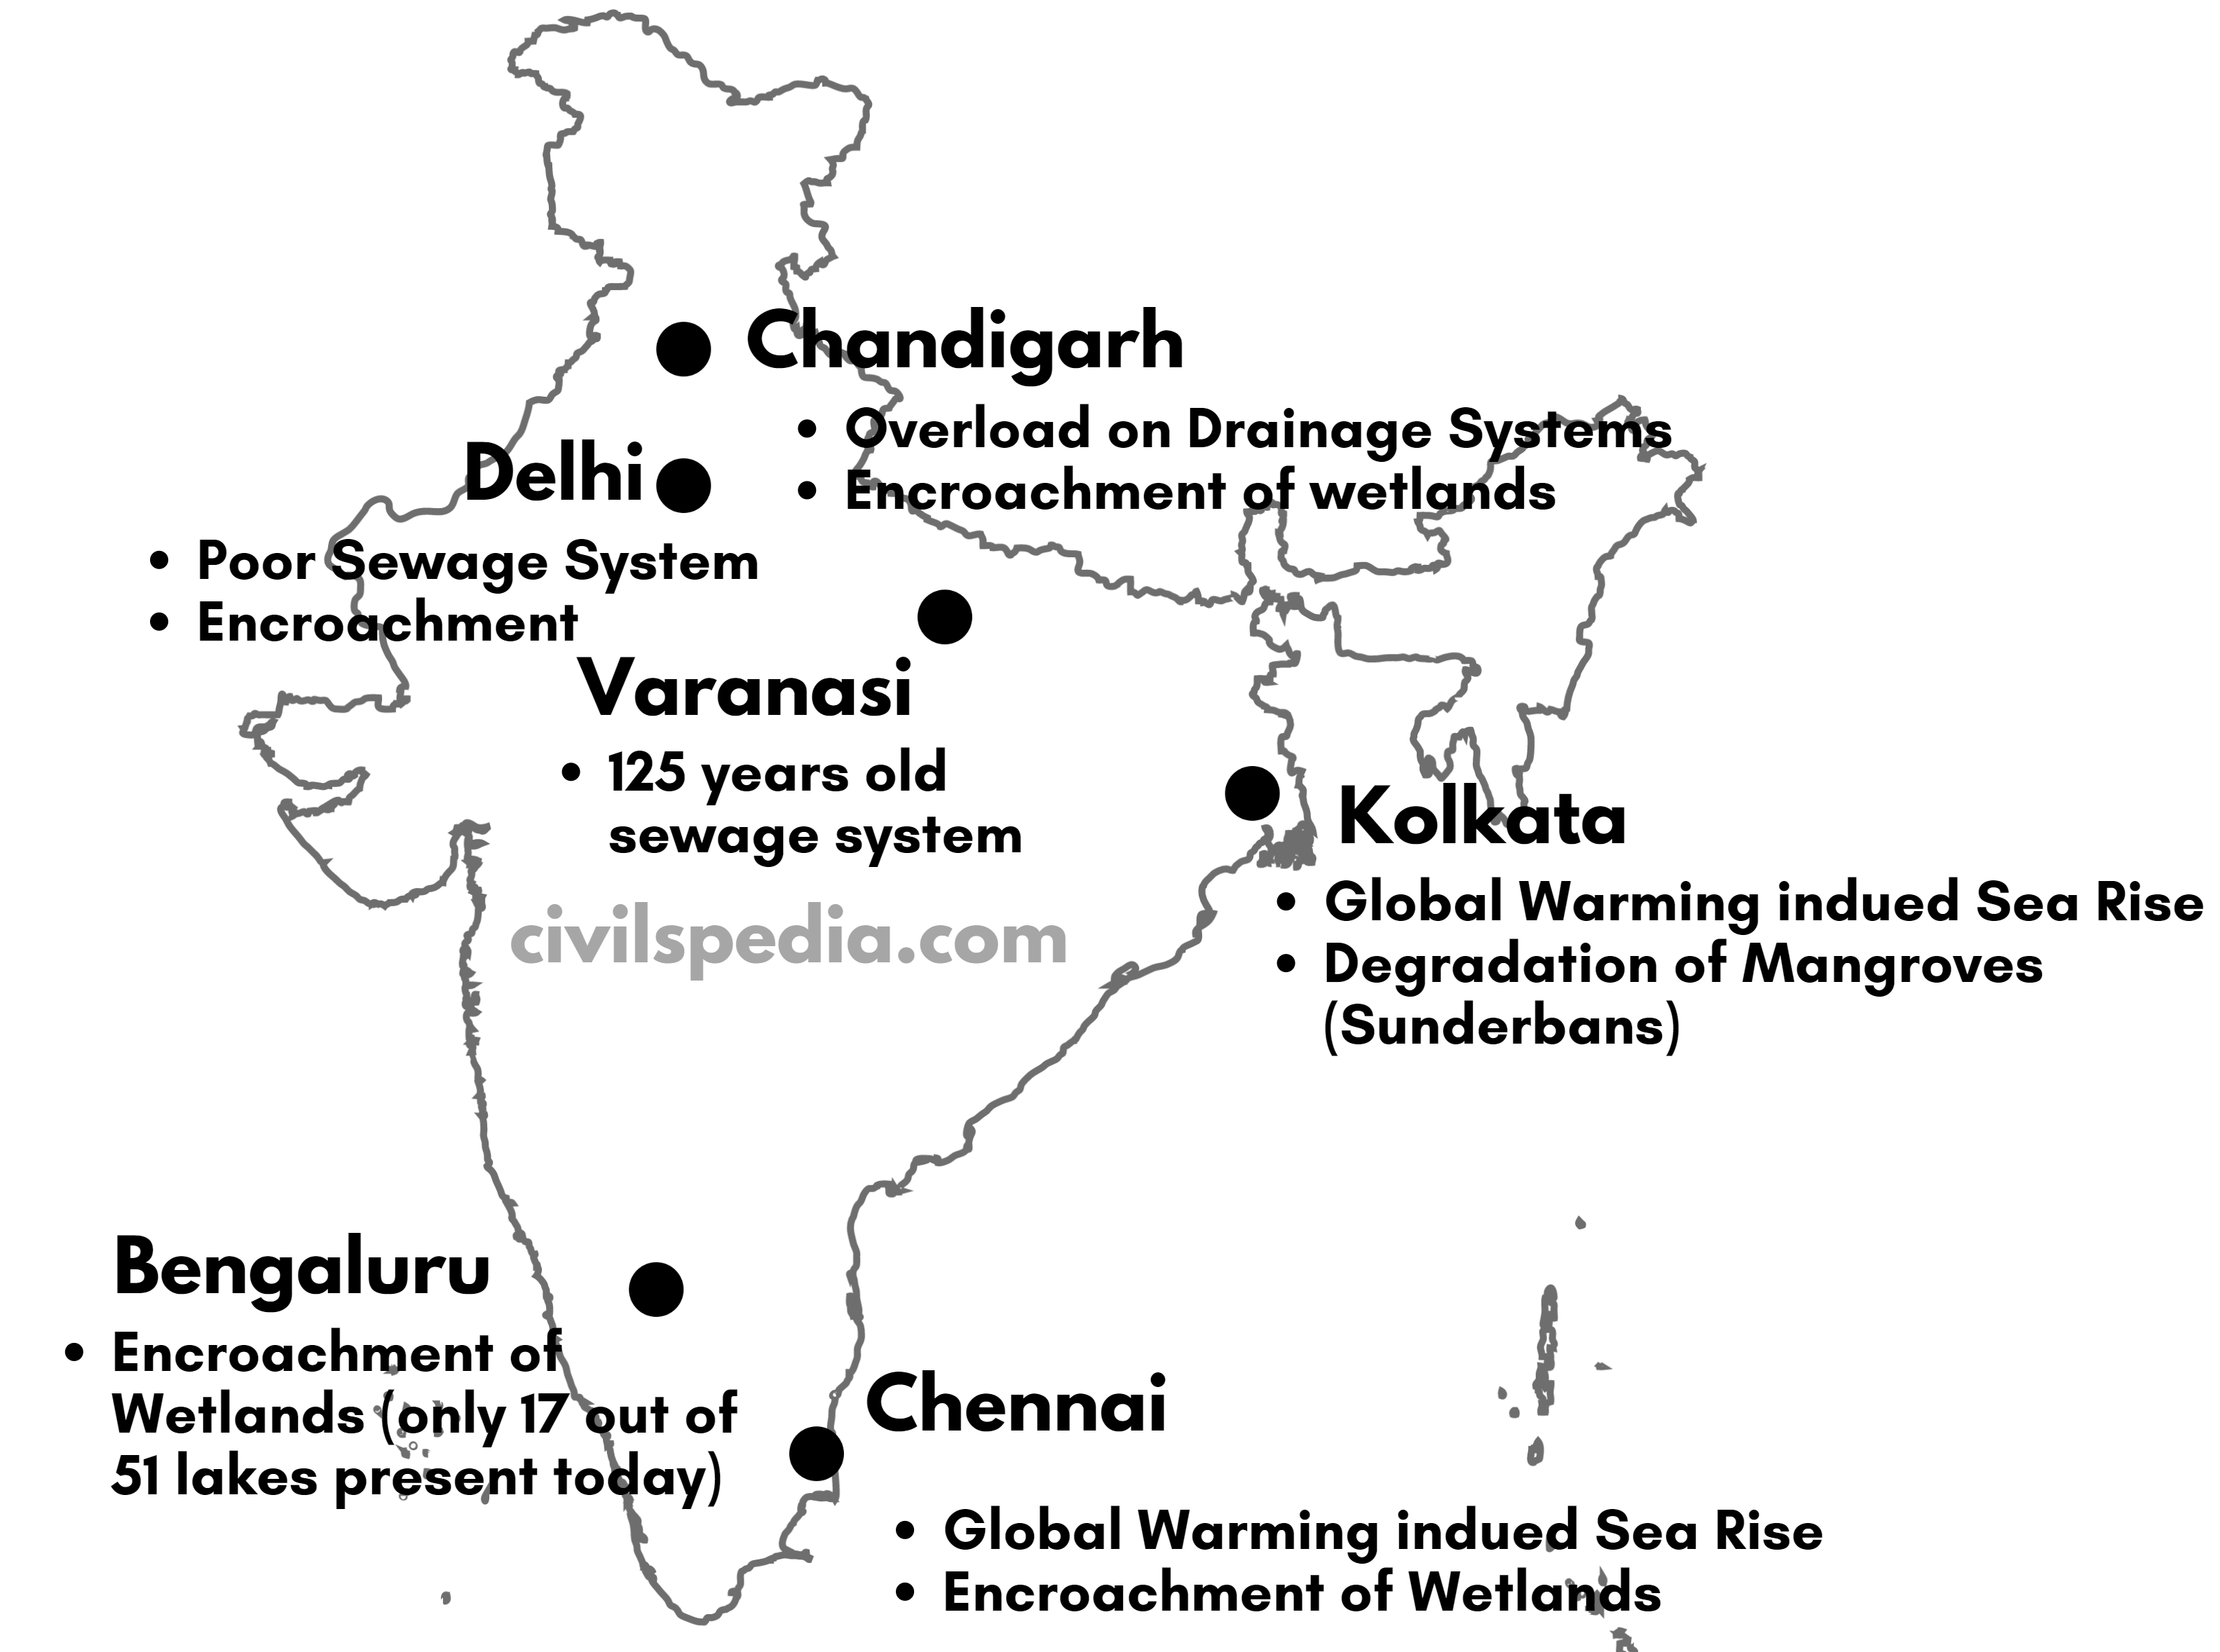 Cities facing Urban Flooding in India